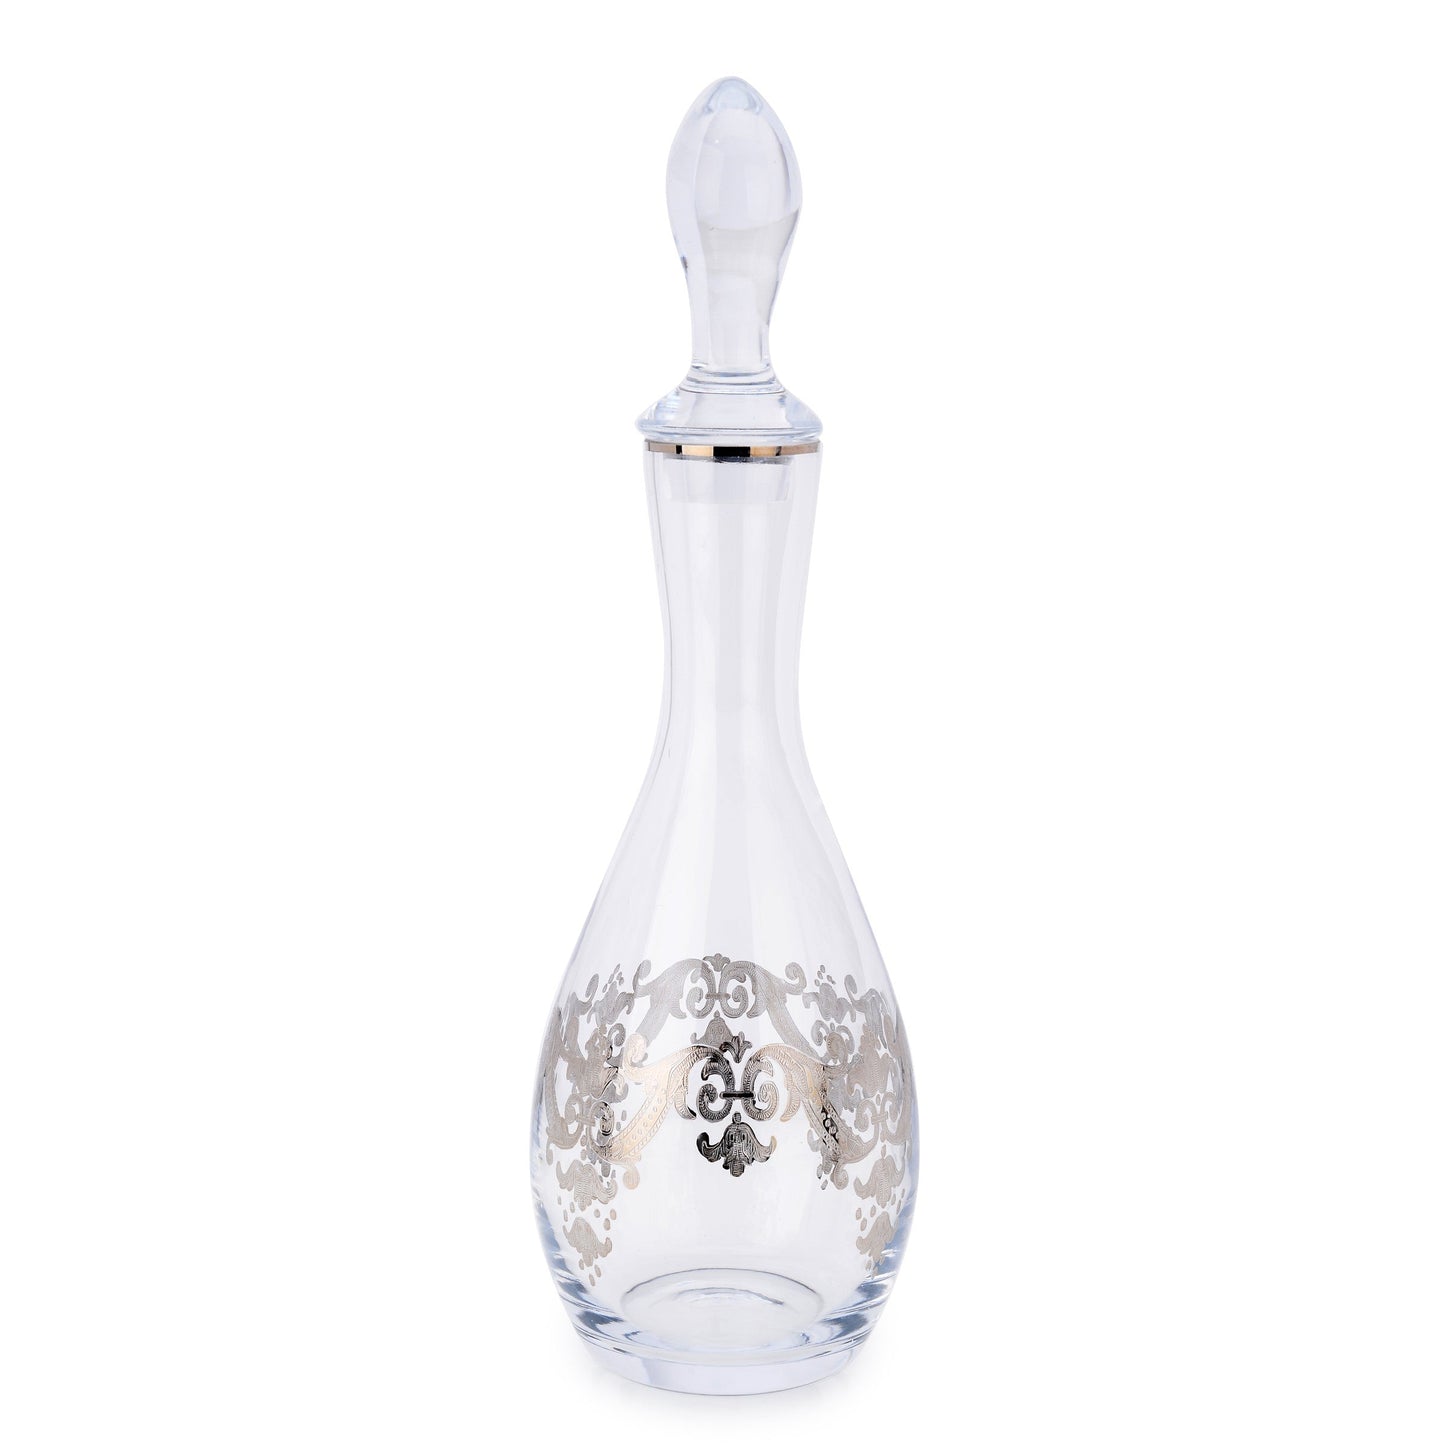 Classic Touch Decor Wine Decaner With 24K Silver Artwork, Glass, 14"